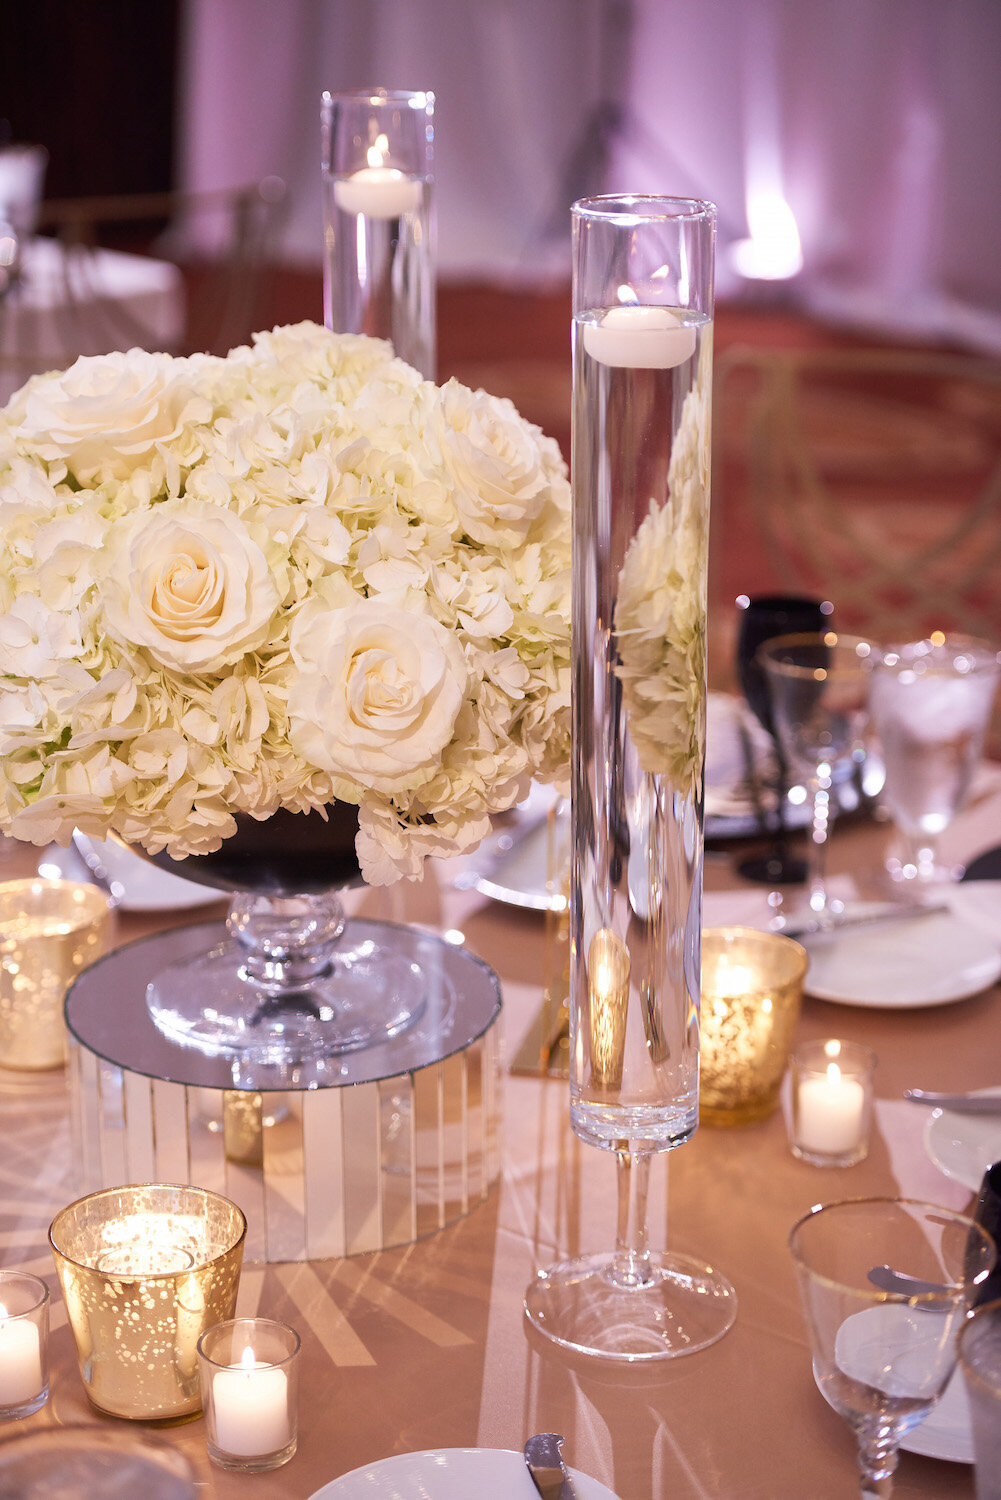 St. Louis Wedding Flowers - Cylinder Vase with Floating Candle in St Louis,  MO